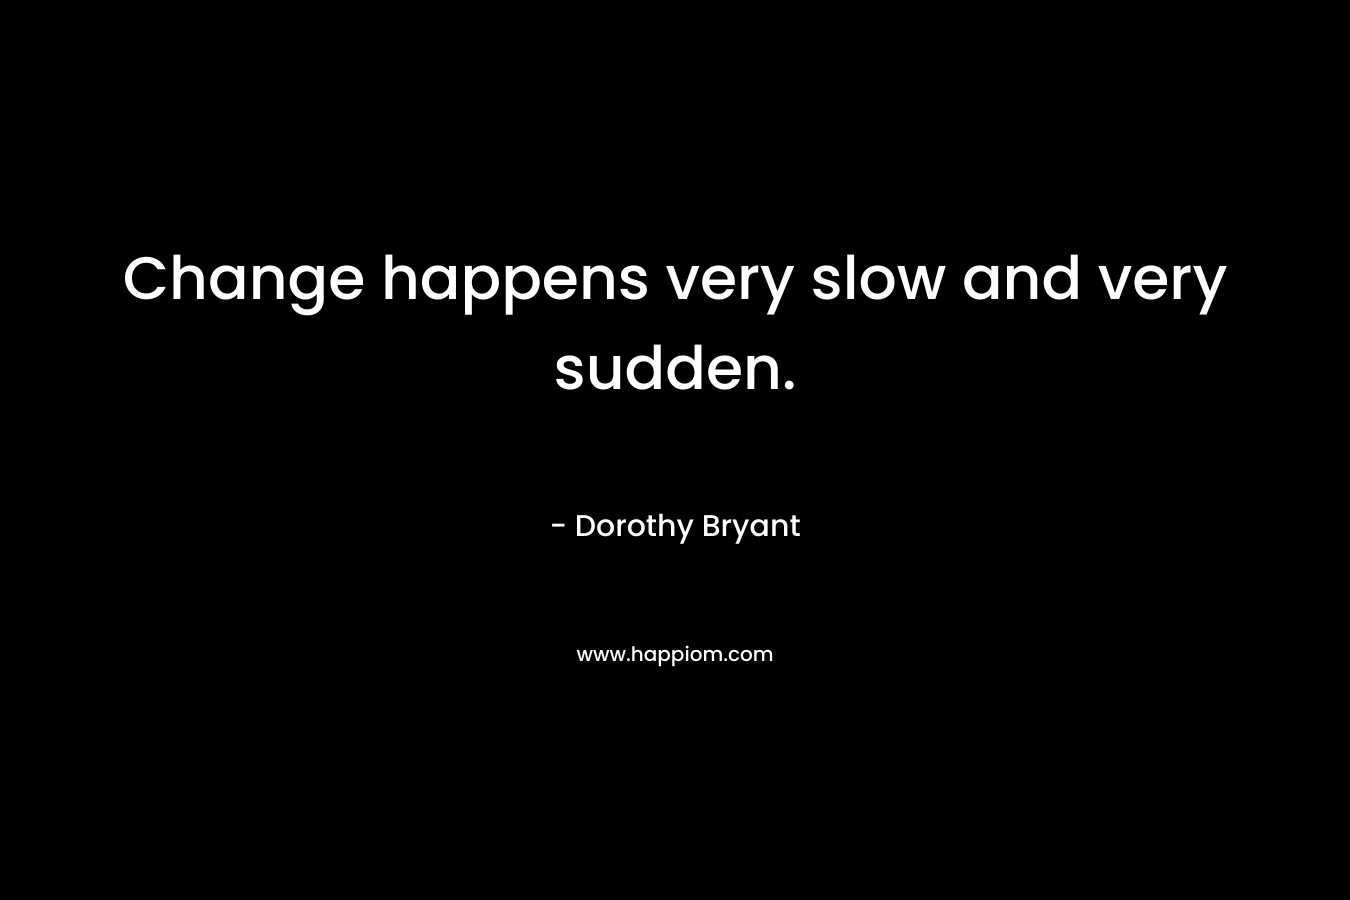 Change happens very slow and very sudden.